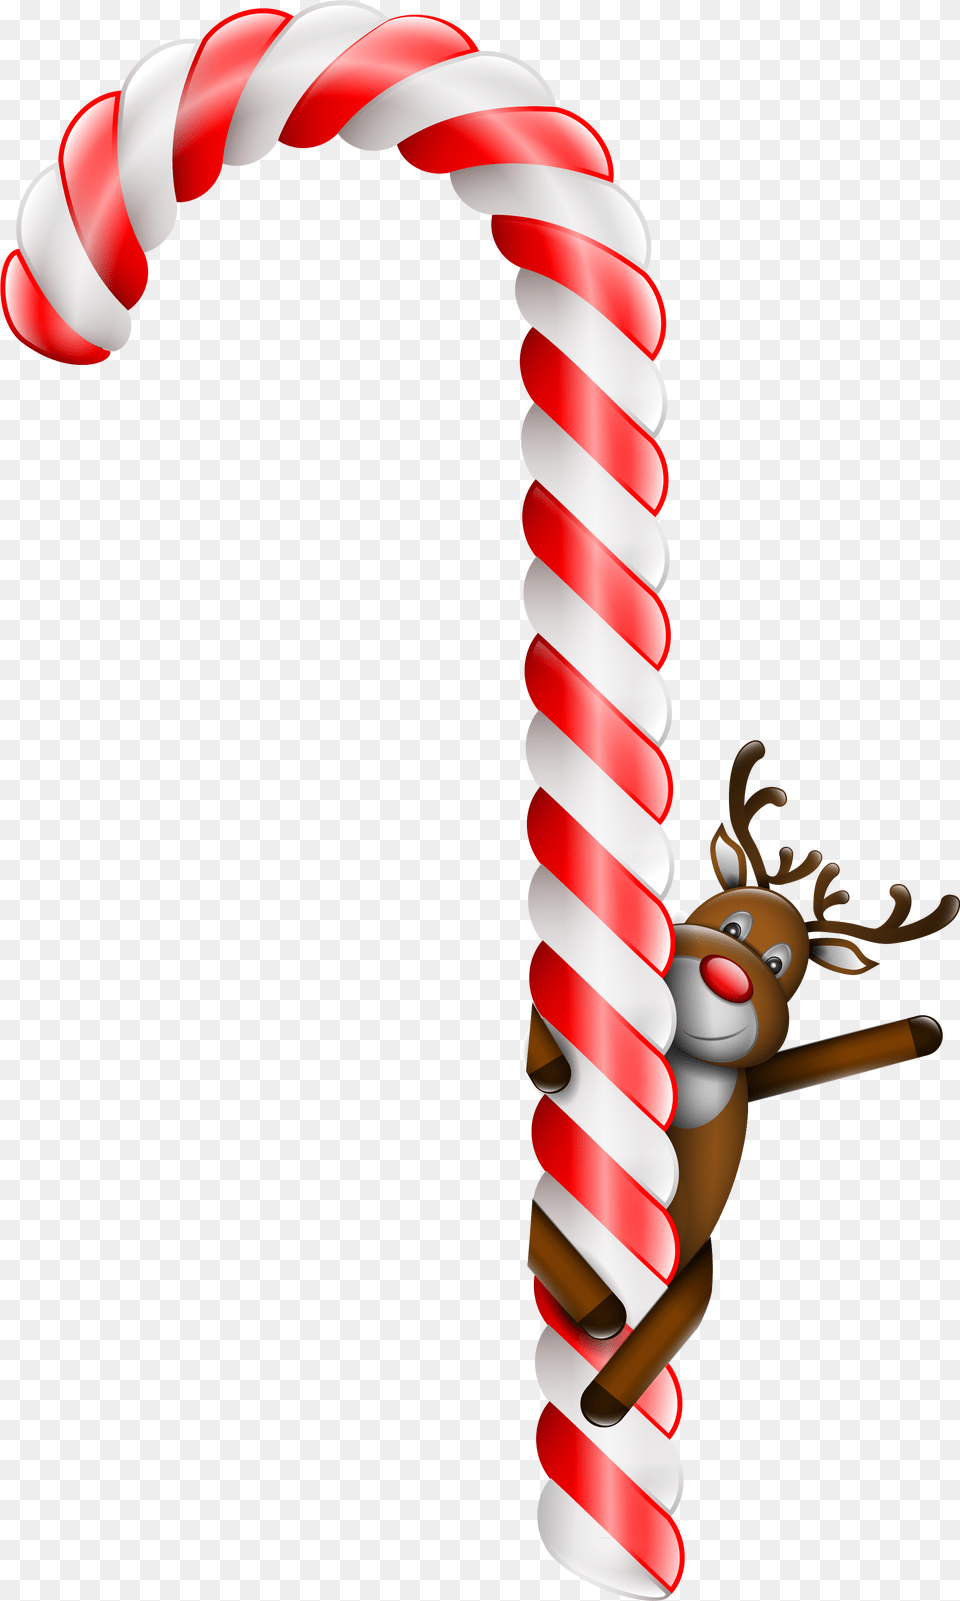 Candy Cane Stick Candy Lollipop Christmas Clip Art Candy Canes Background, Food, Sweets, Dynamite, Weapon Free Transparent Png